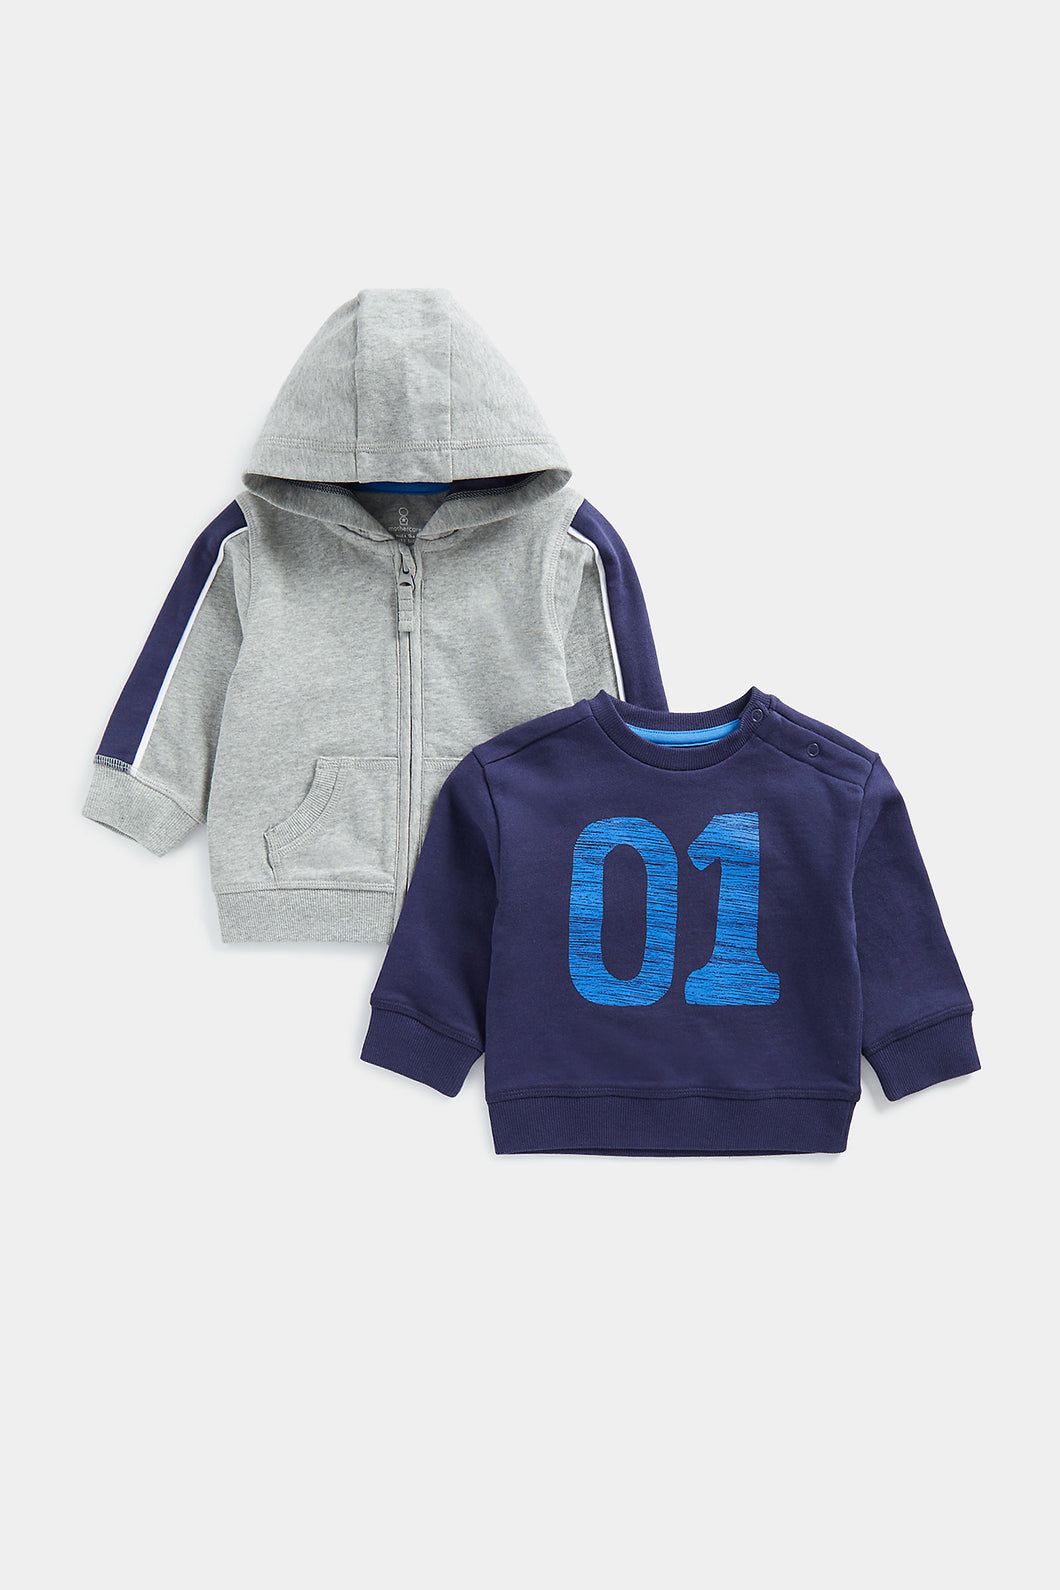 Mothercare Grey Hoody and Navy Sweat Set